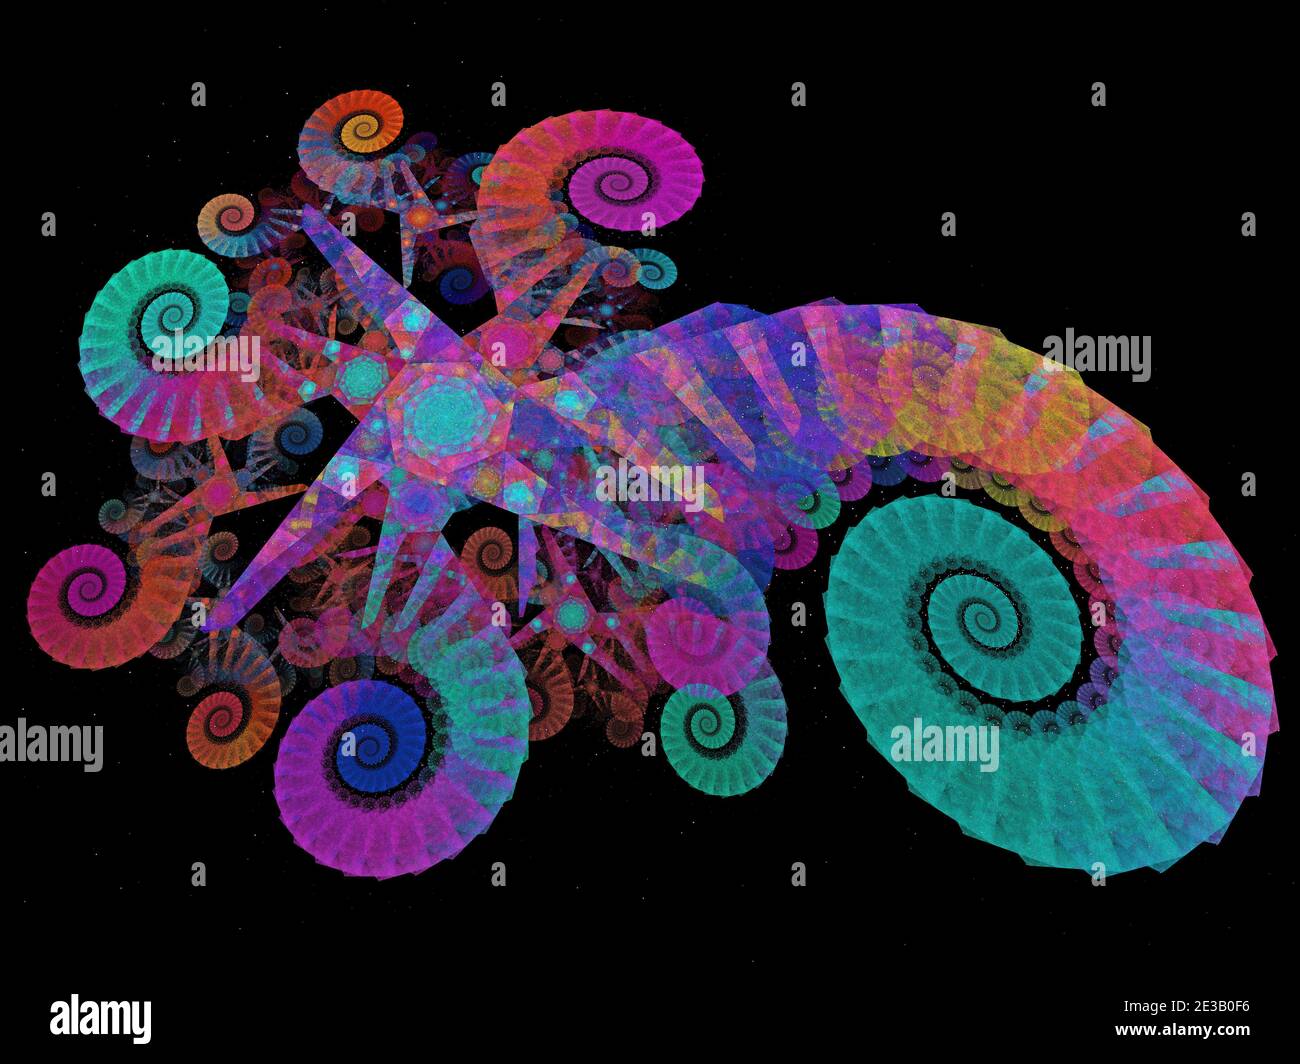 Colourful Spiraling Sparkly Design Stock Photo